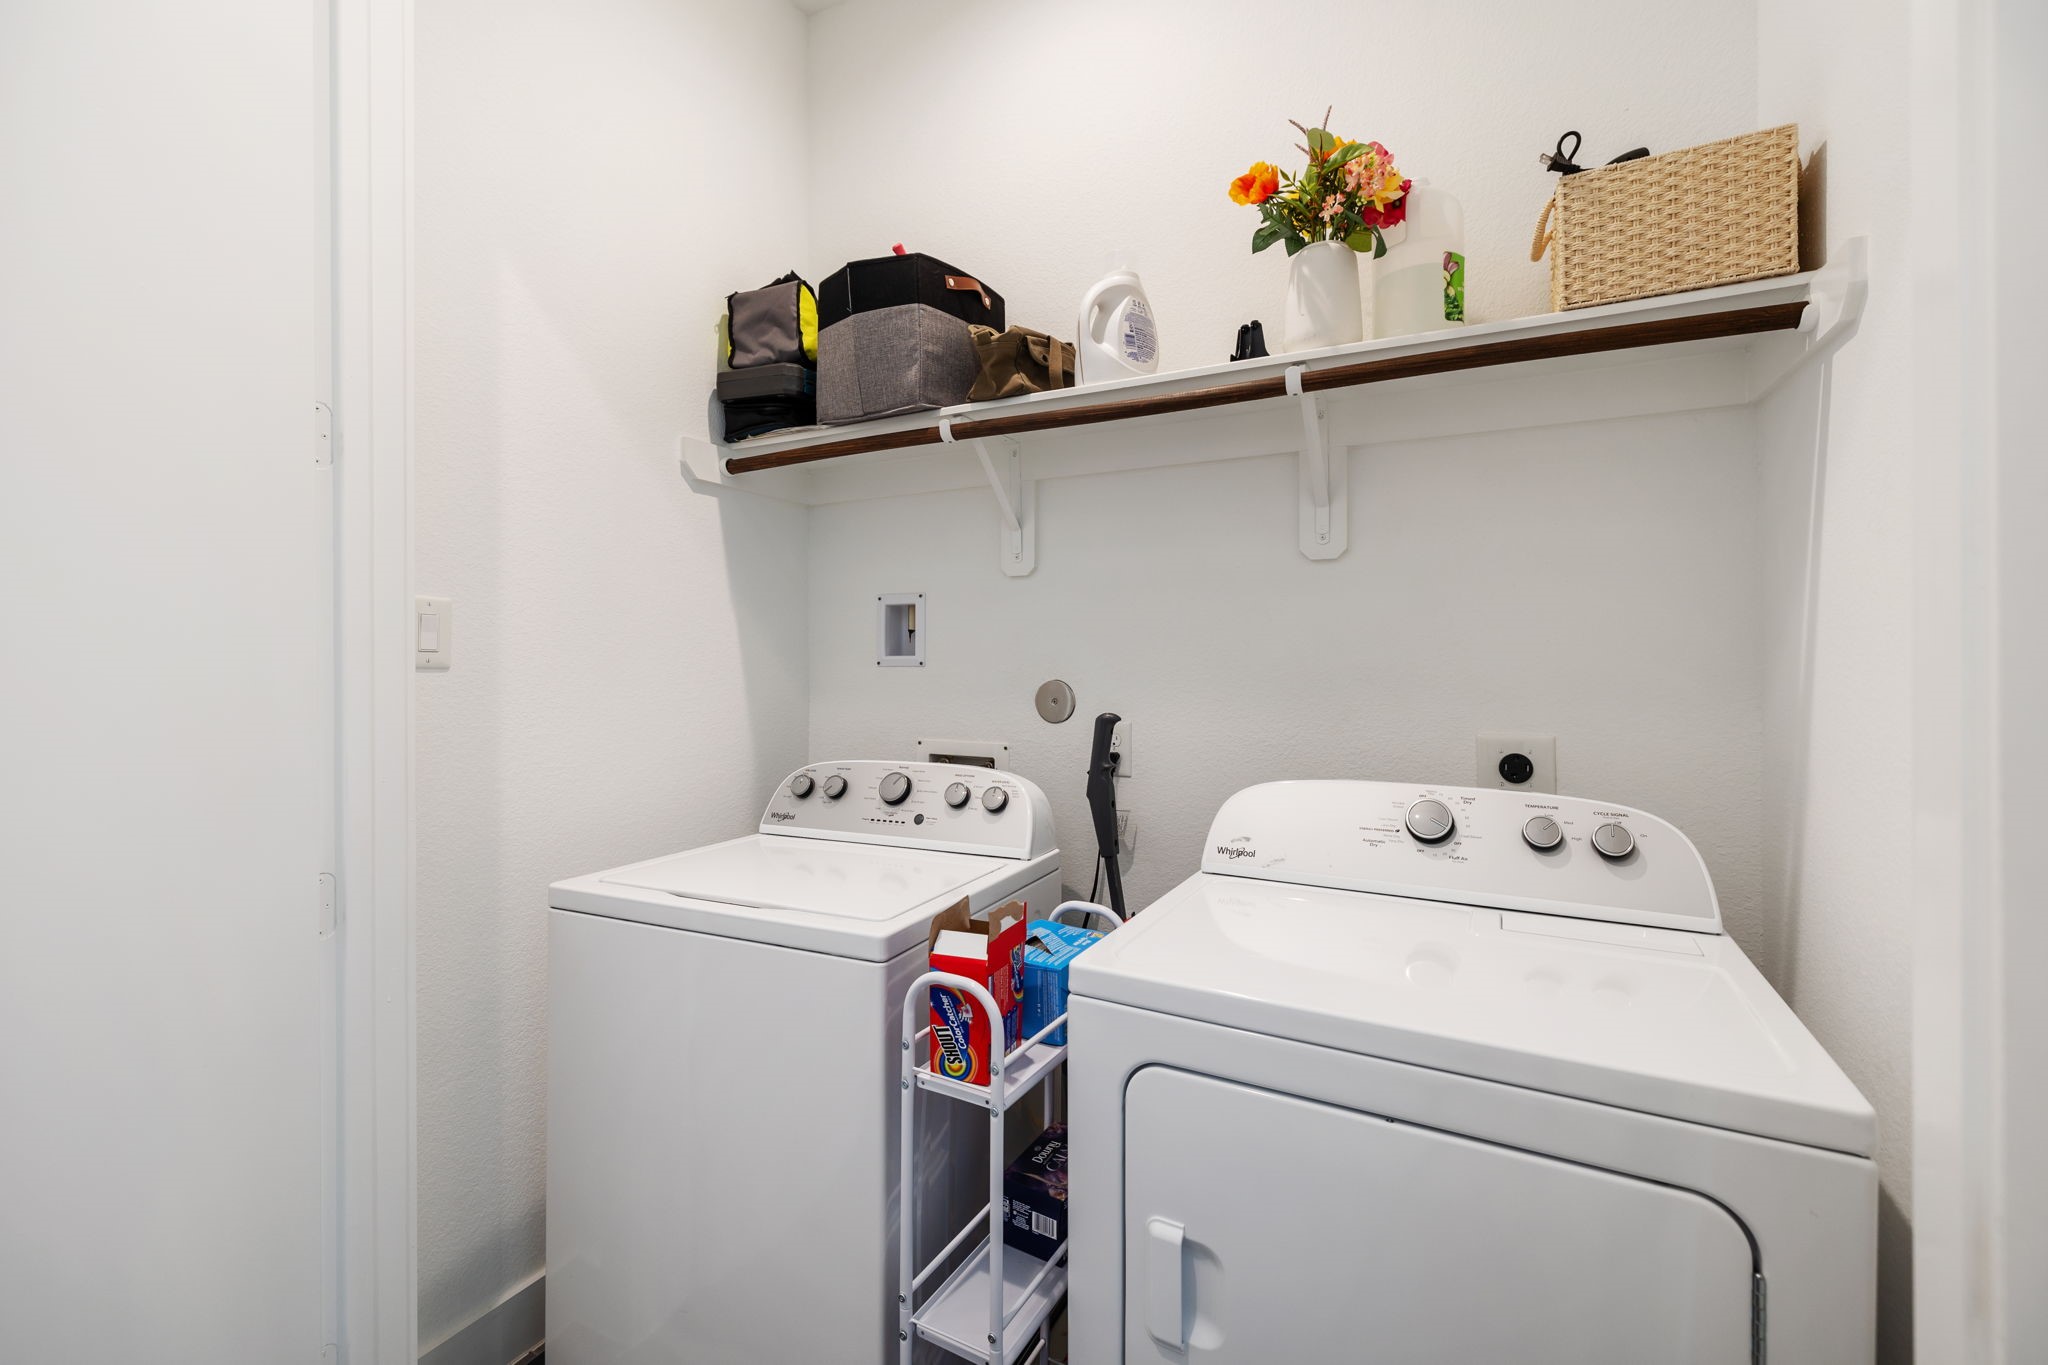 Utility room is intelligently situated on the third floor between the two bedrooms for easy acess.